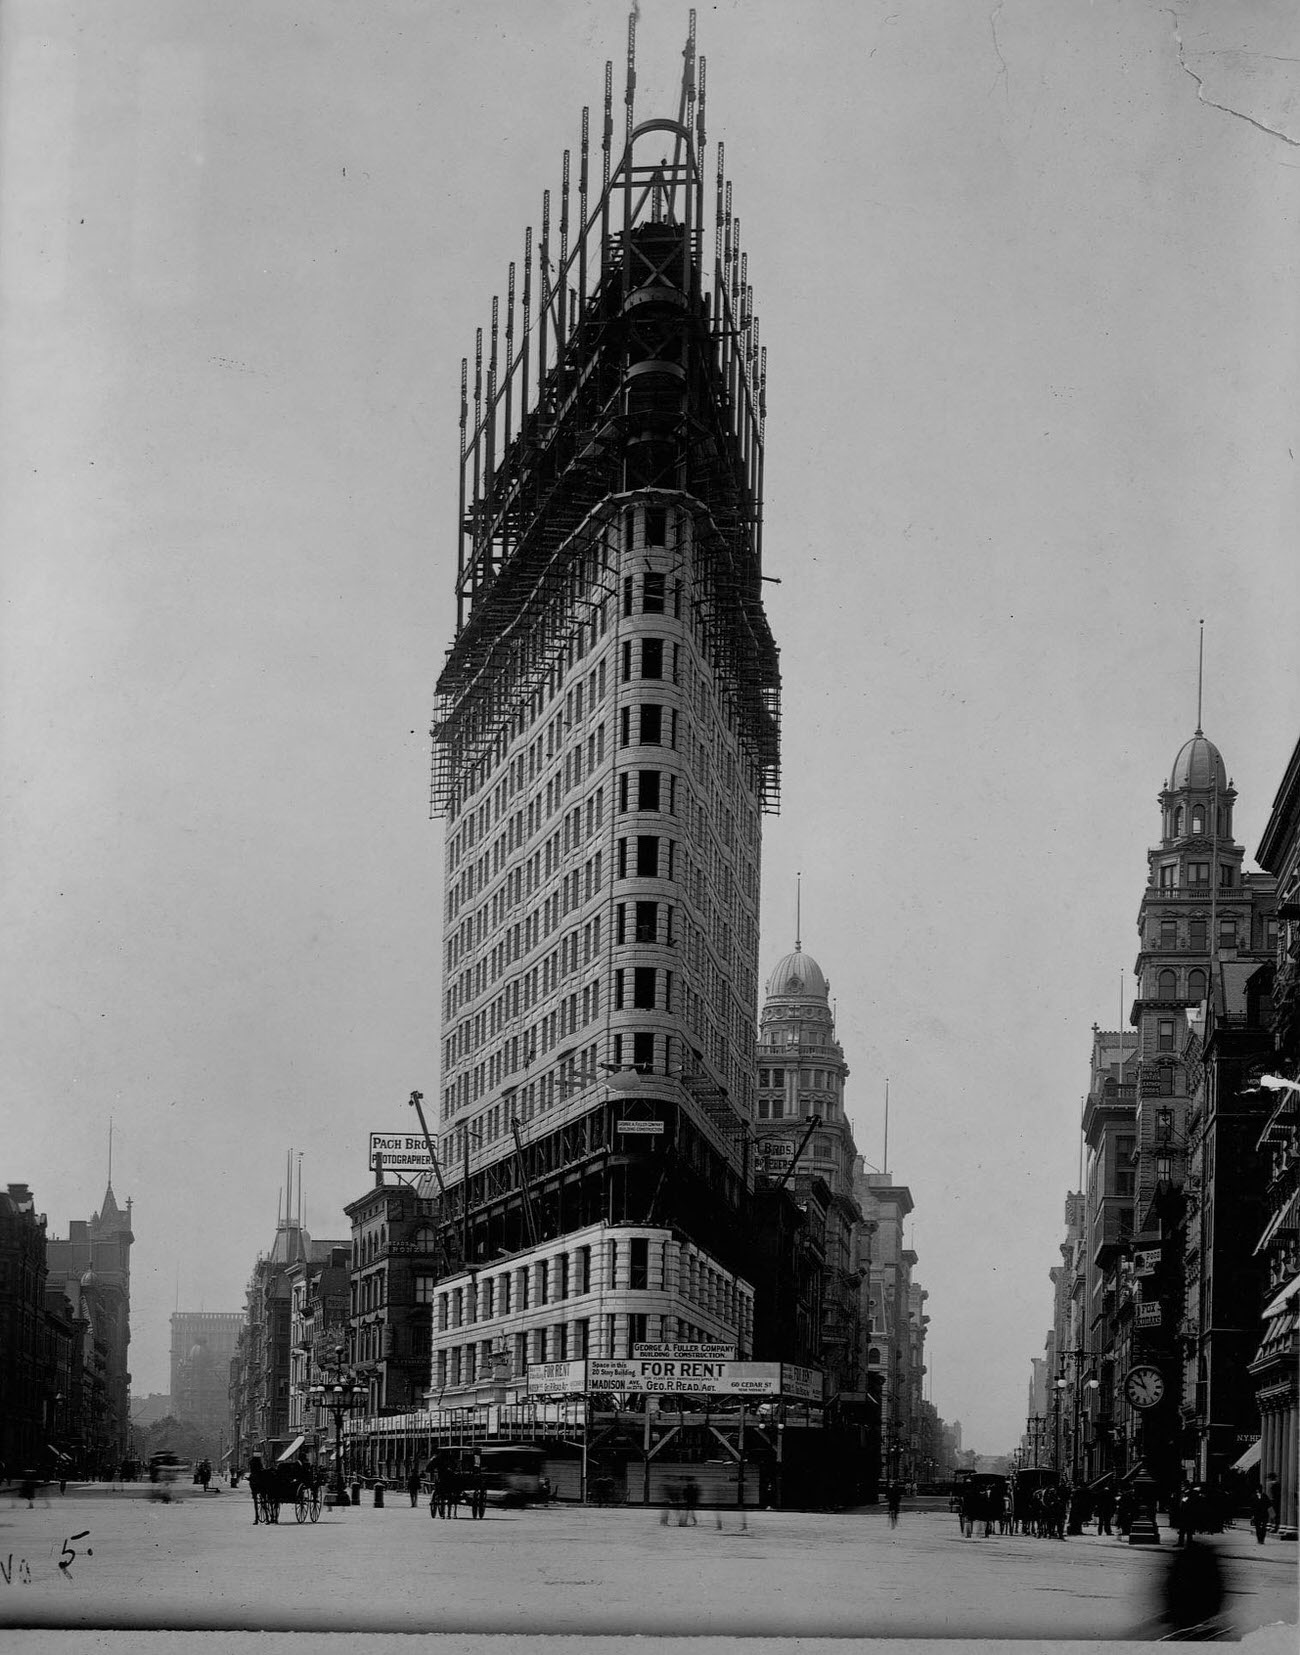 A Steel Skeleton, One Of The First To Be Used, Enabled Manhattan'S Flatiron Building To Become The Tallest Building In The World, Approximately 300 Feet High, At The Time Of Its Completion.